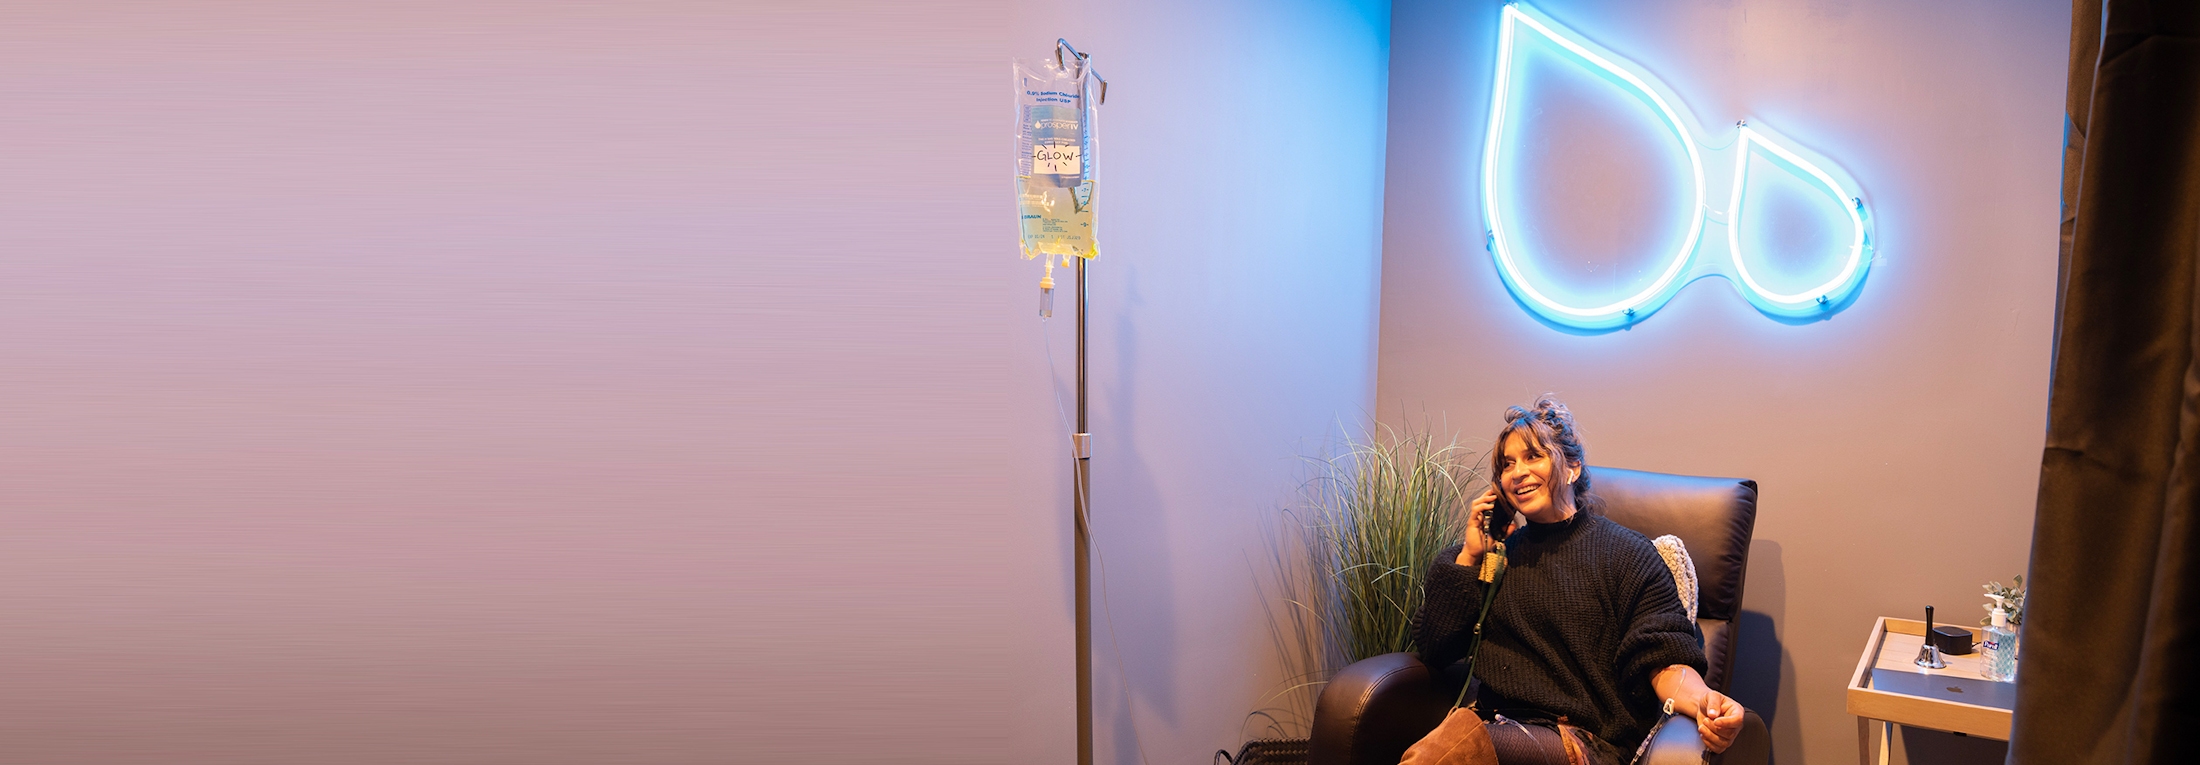 woman getting IV drip while on the phone